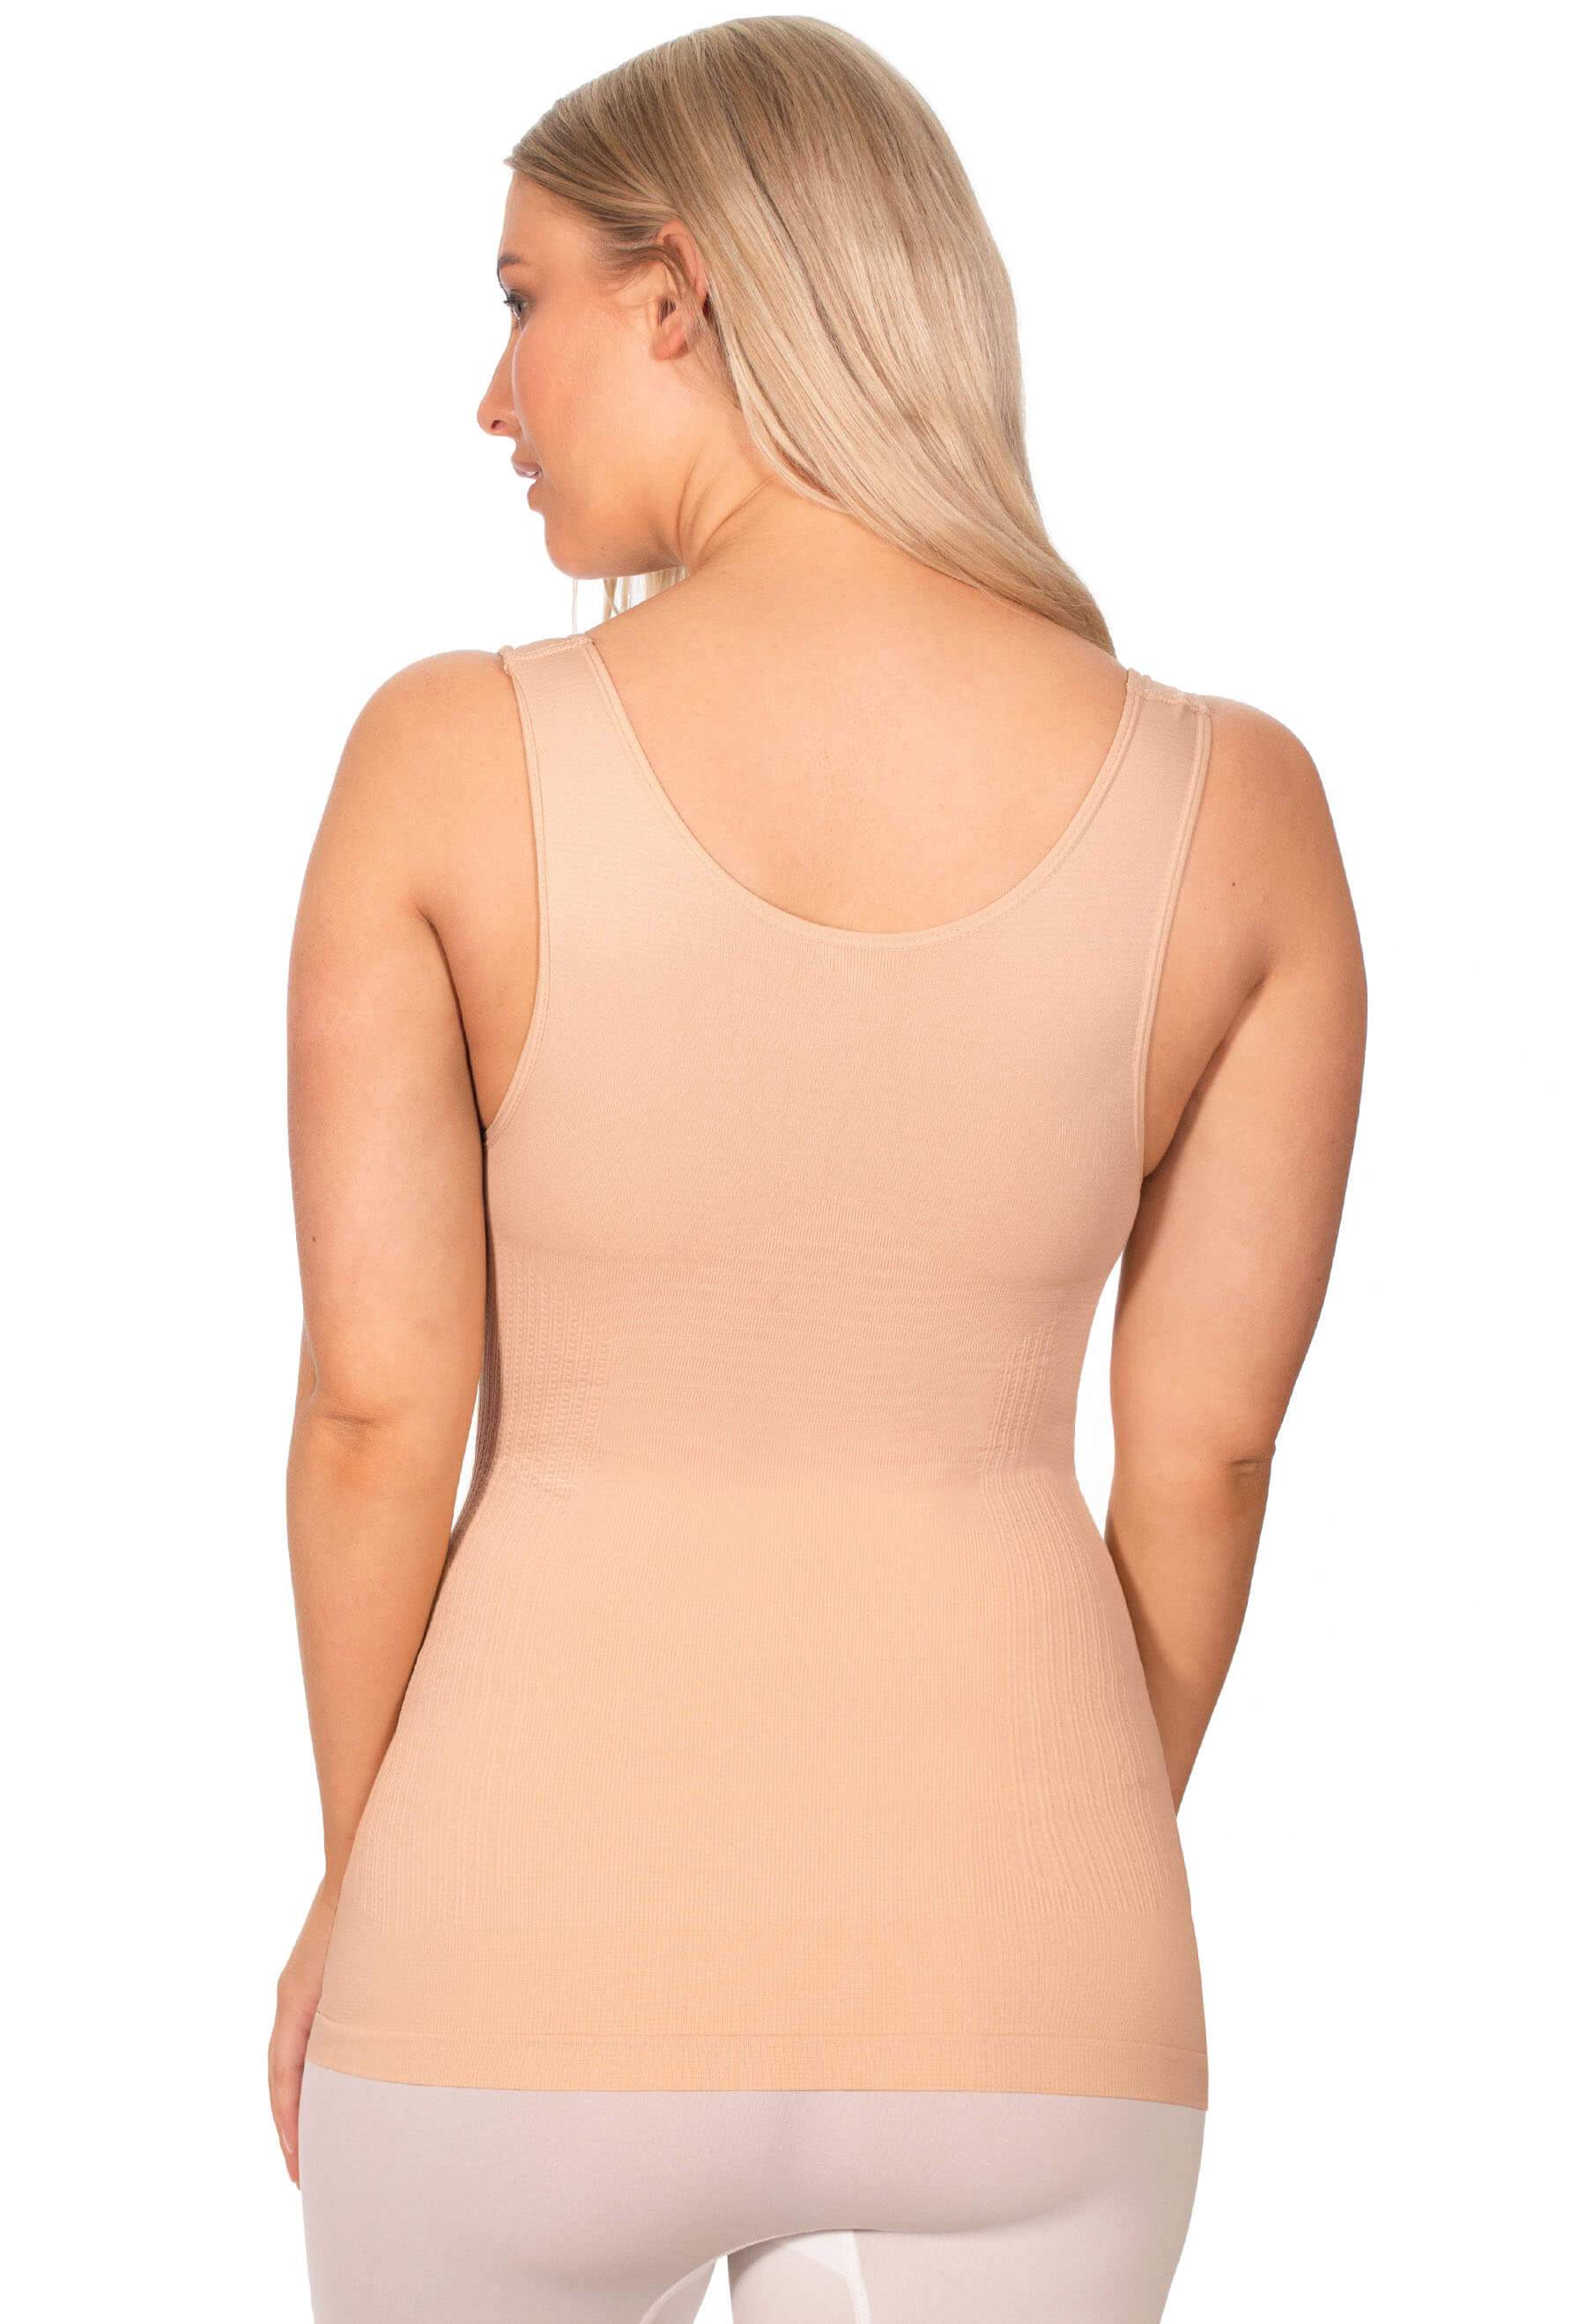 Spanx Trust Your Thinstincts Open Bust Bodysuit on QVC 